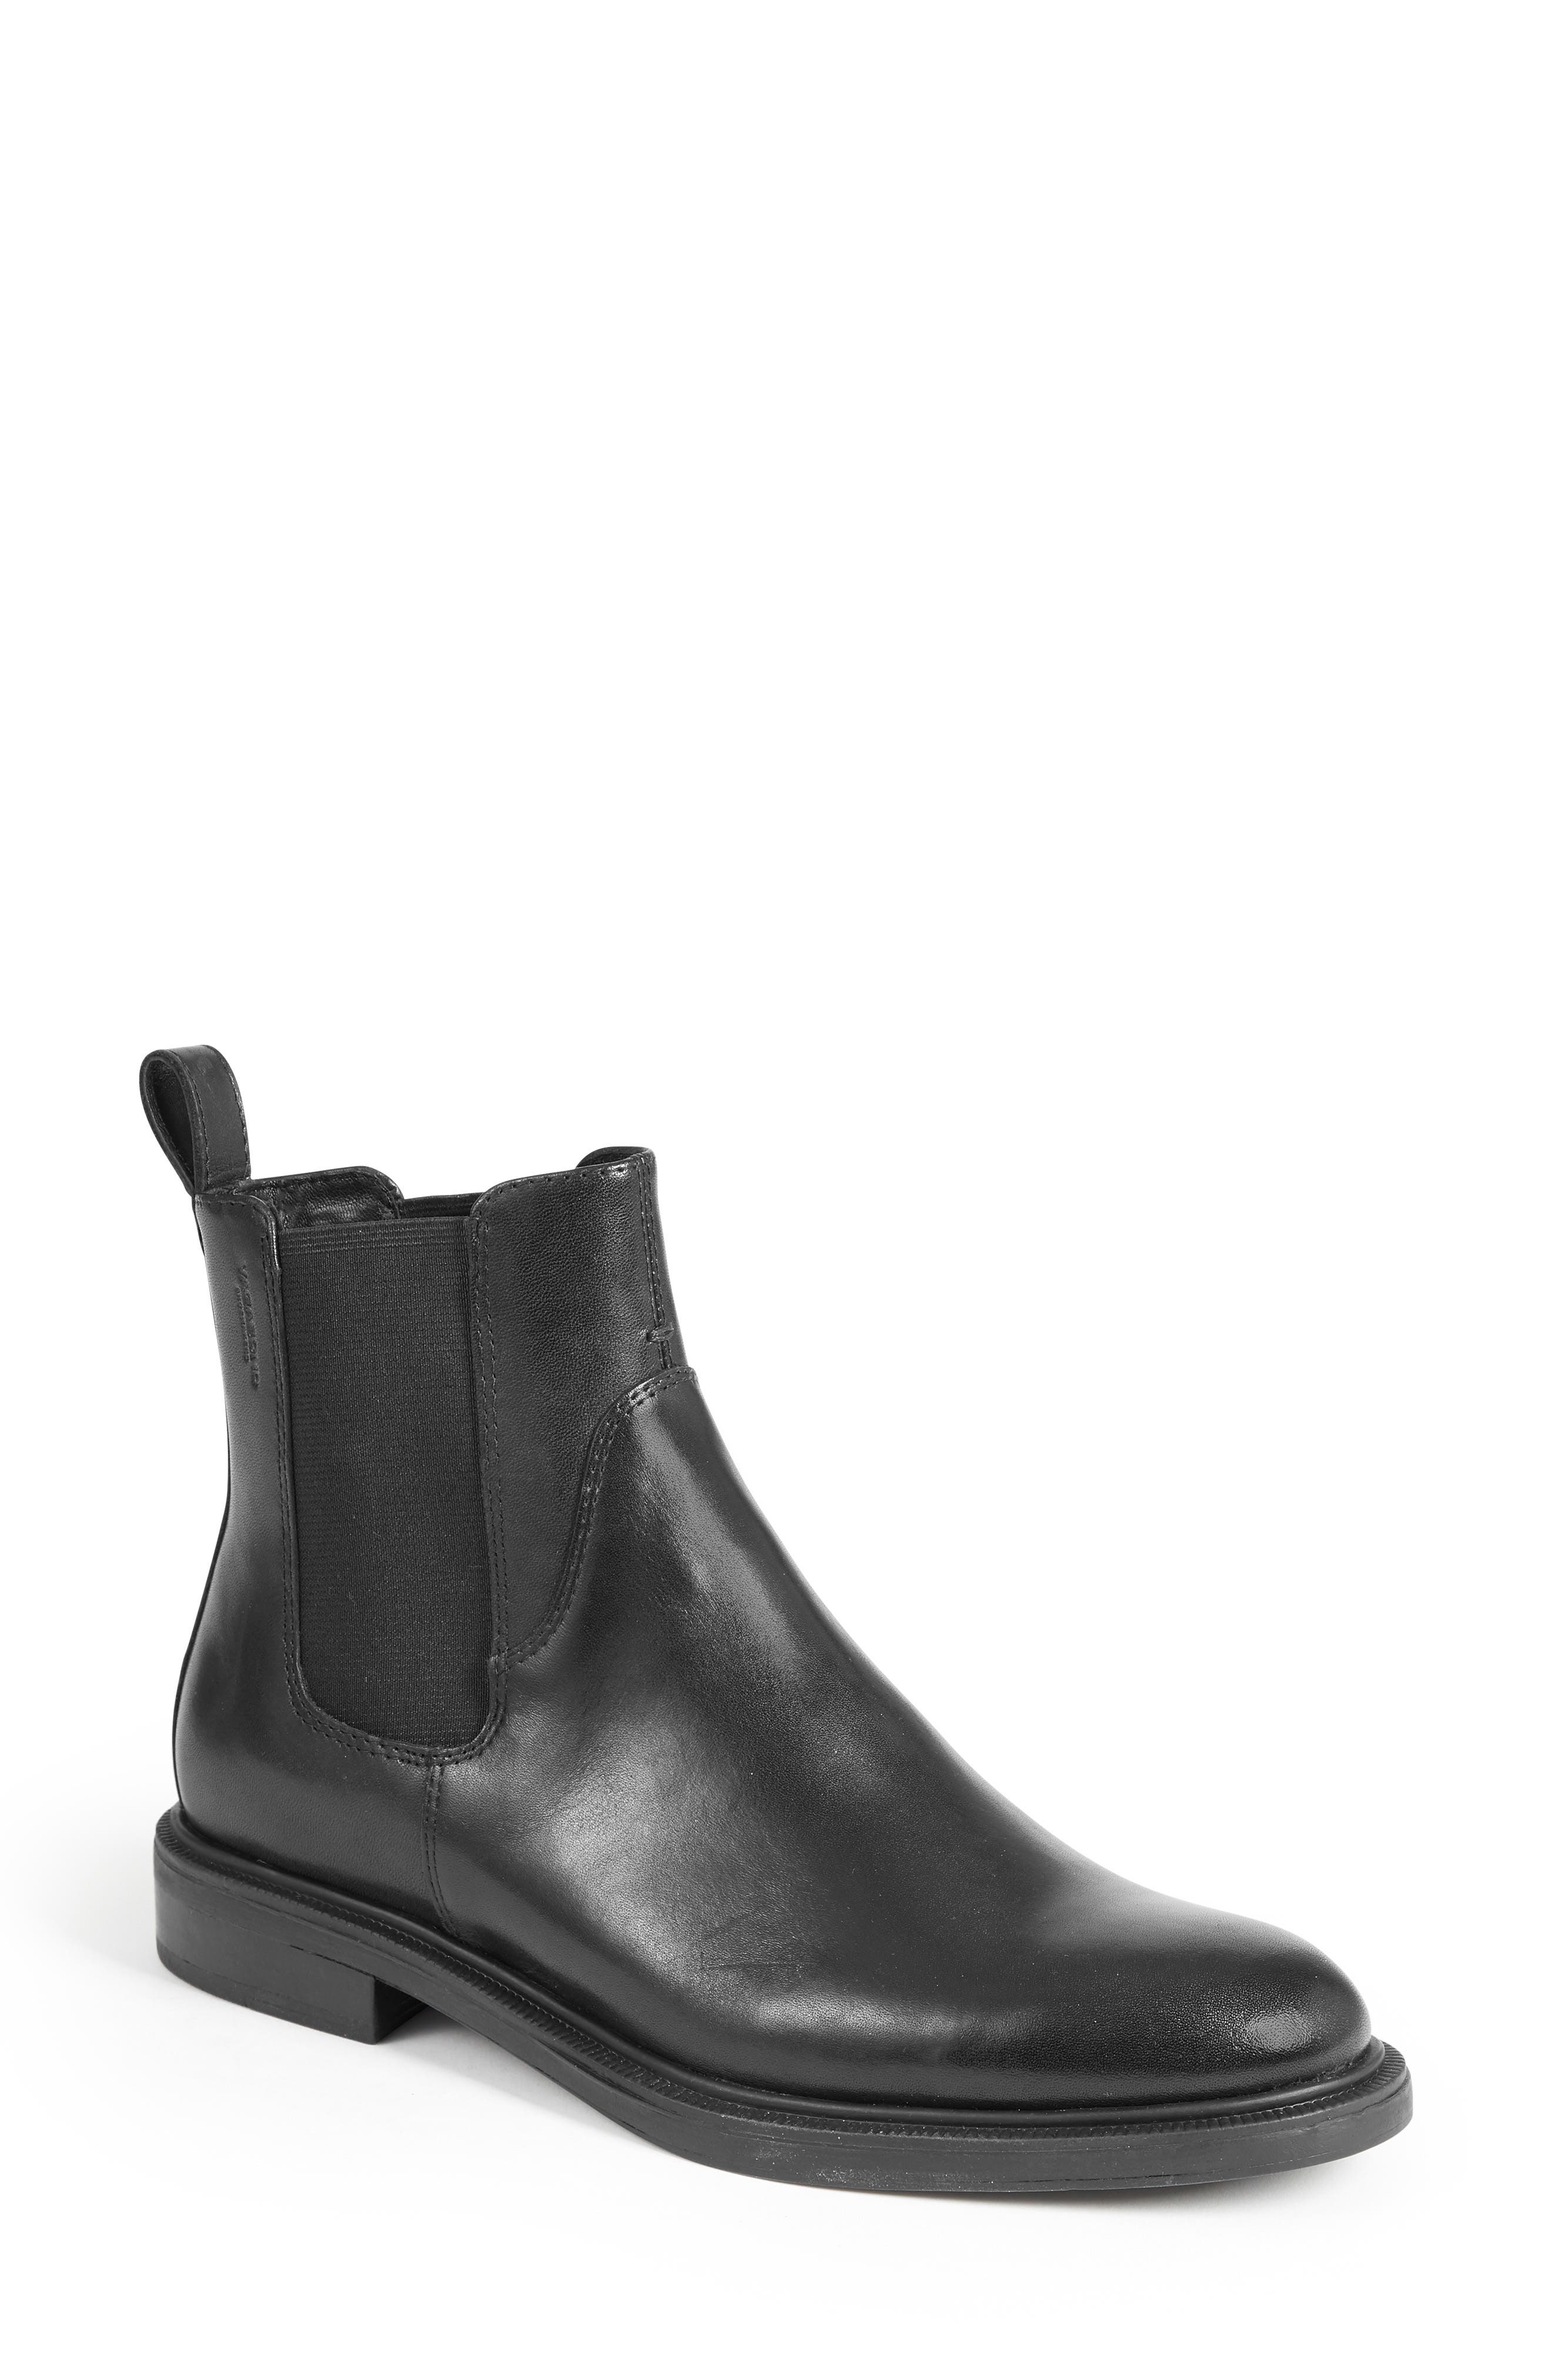 leather womens black boots